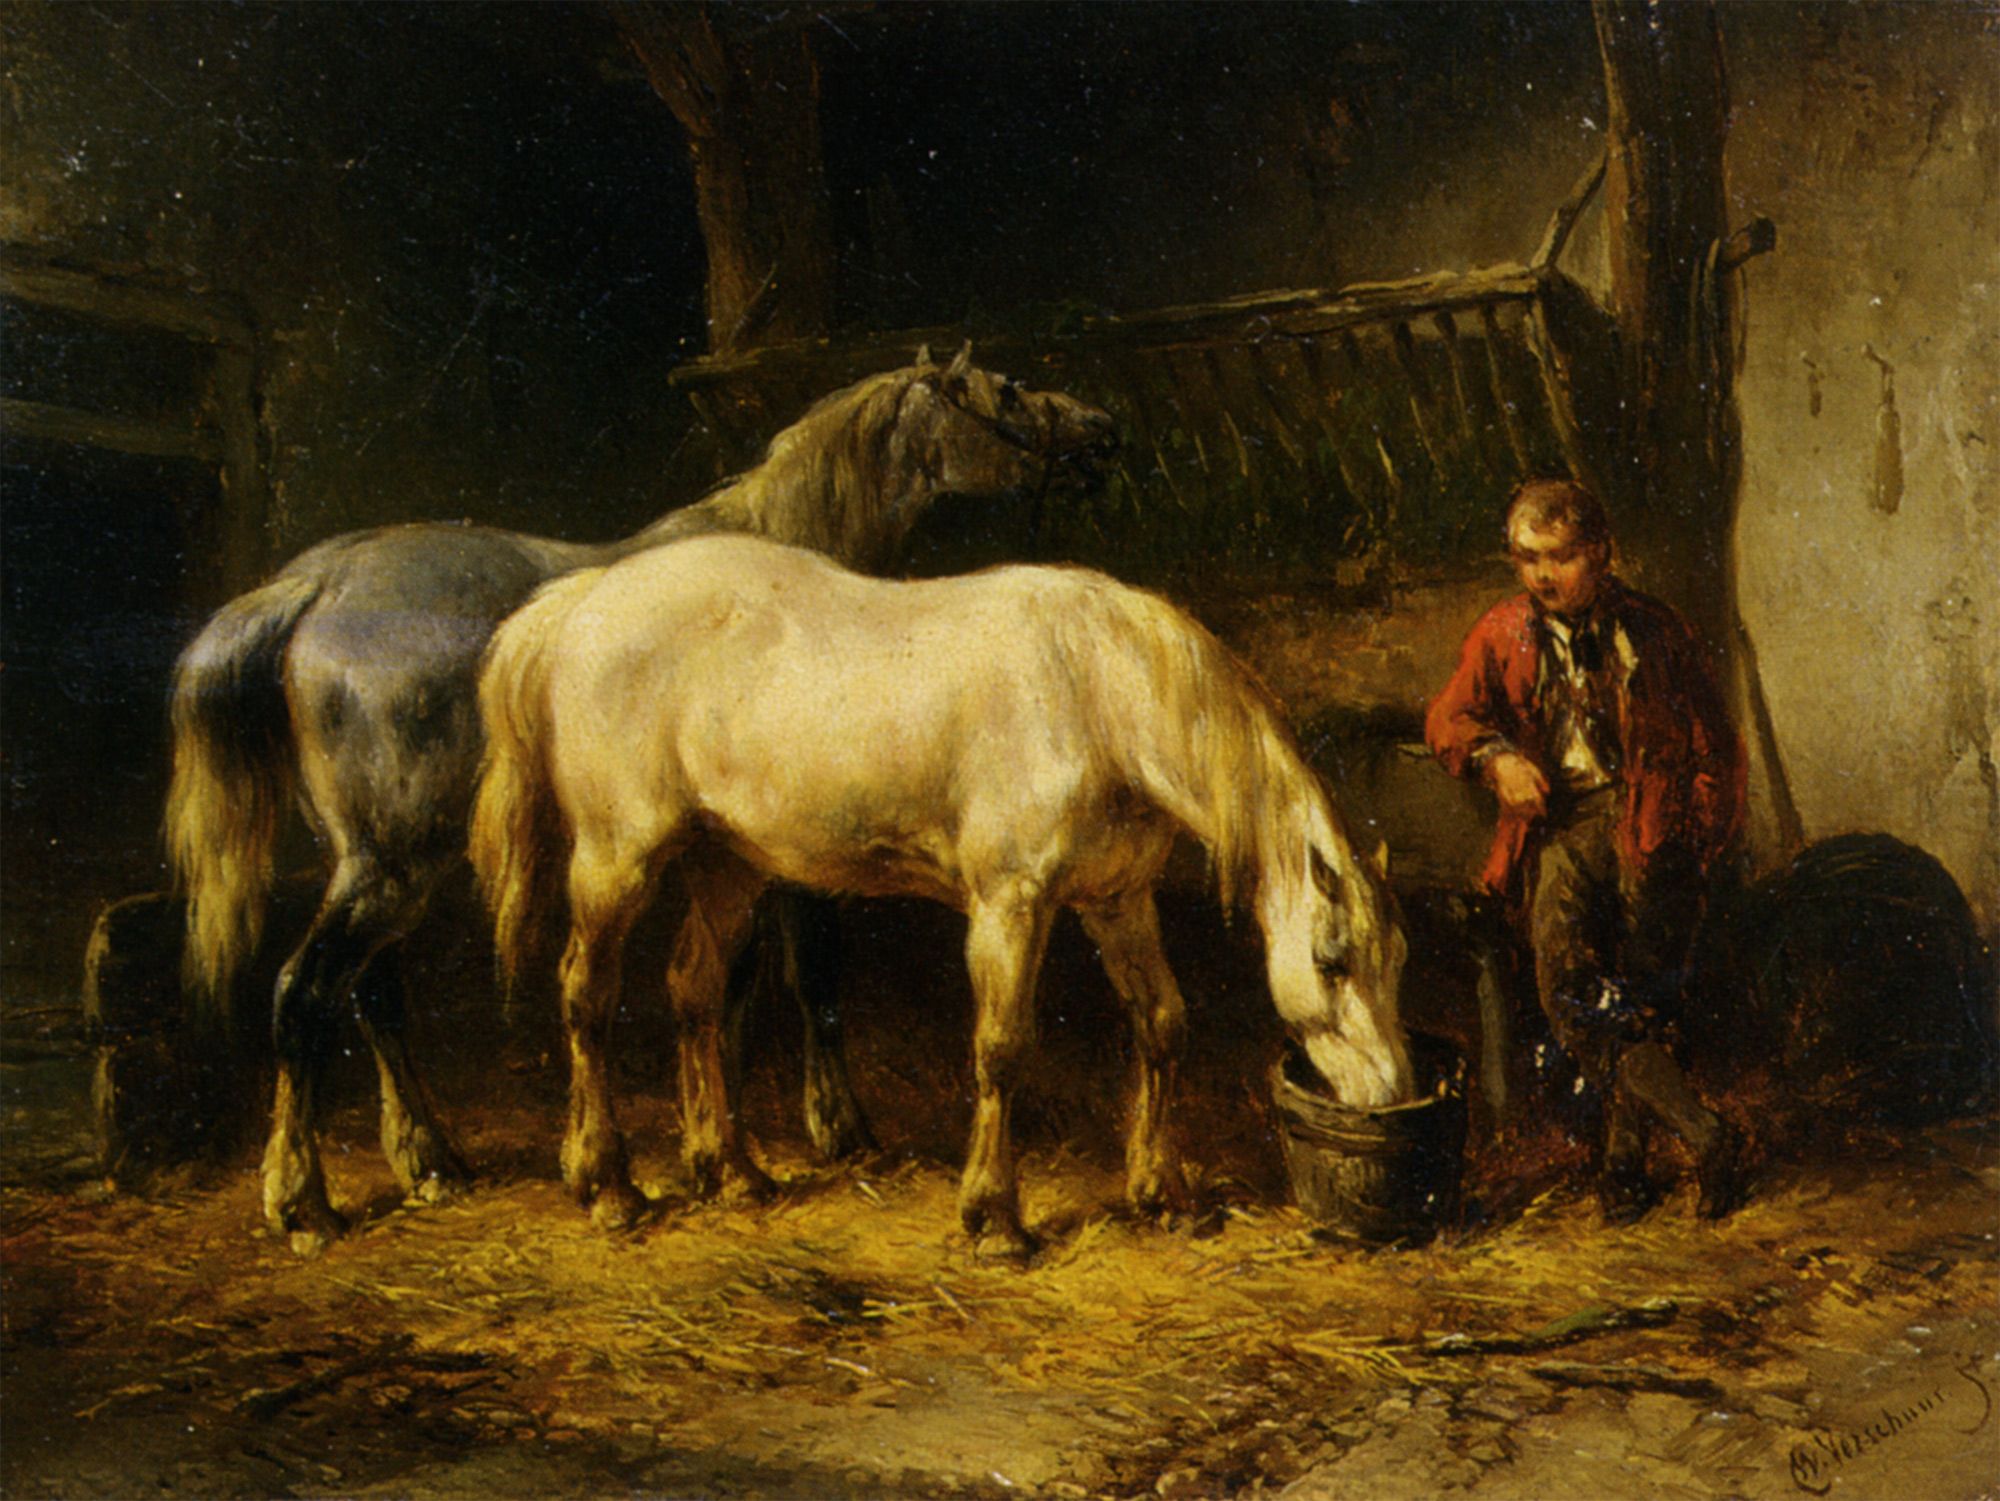 Feeding the Horses by Wouter Verschuur